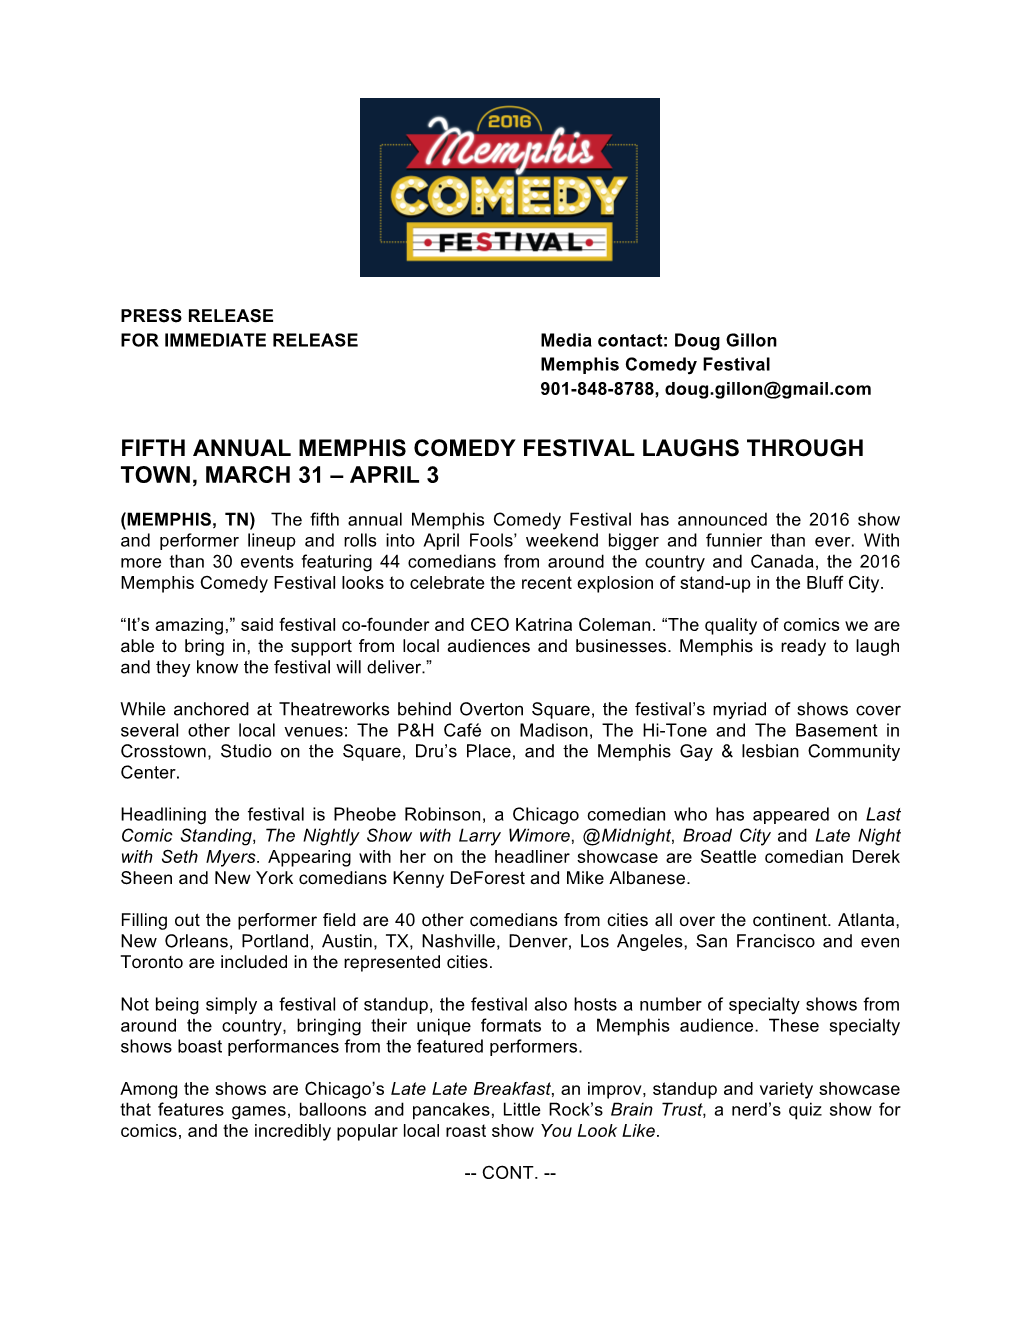 Fifth Annual Memphis Comedy Festival Laughs Through Town, March 31 – April 3